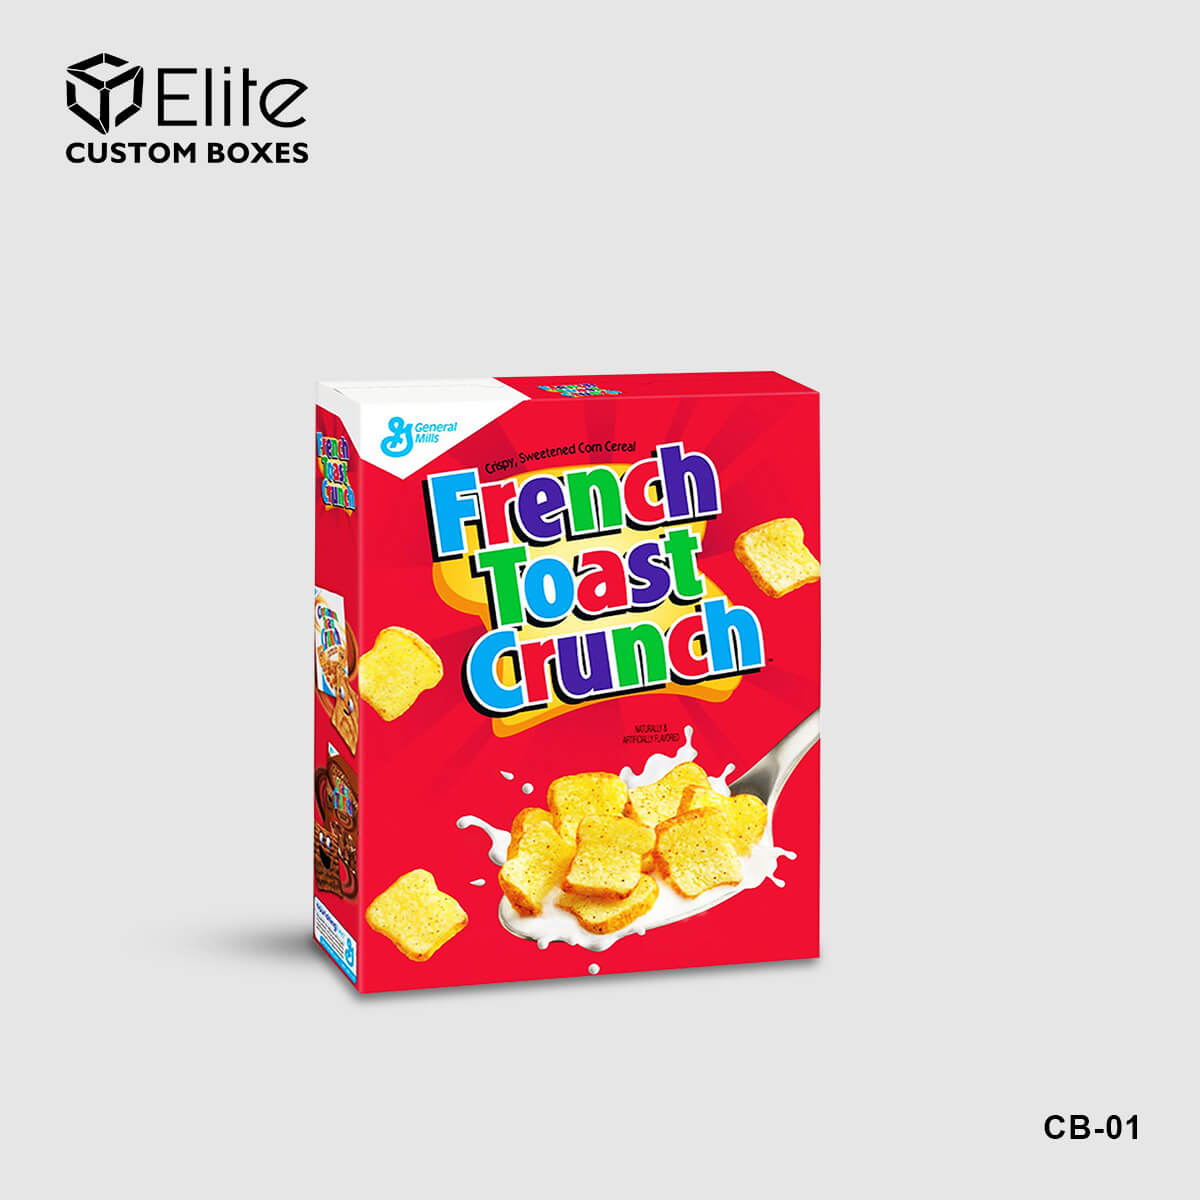 cereal-boxes